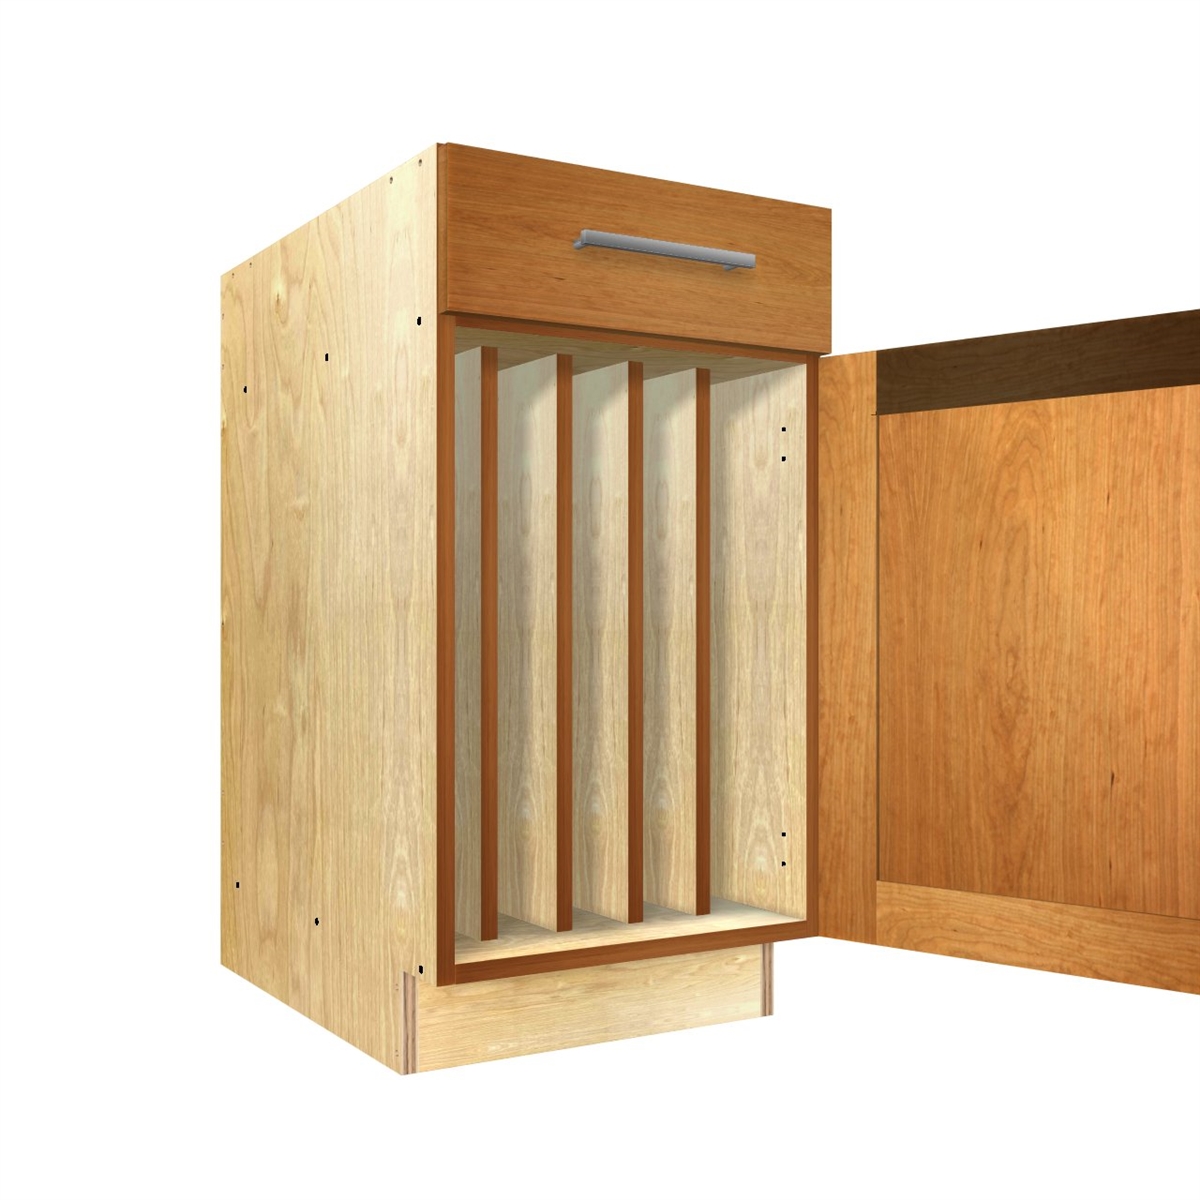 1 door base cabinet with FULL HEIGHT TRAY DIVIDERS